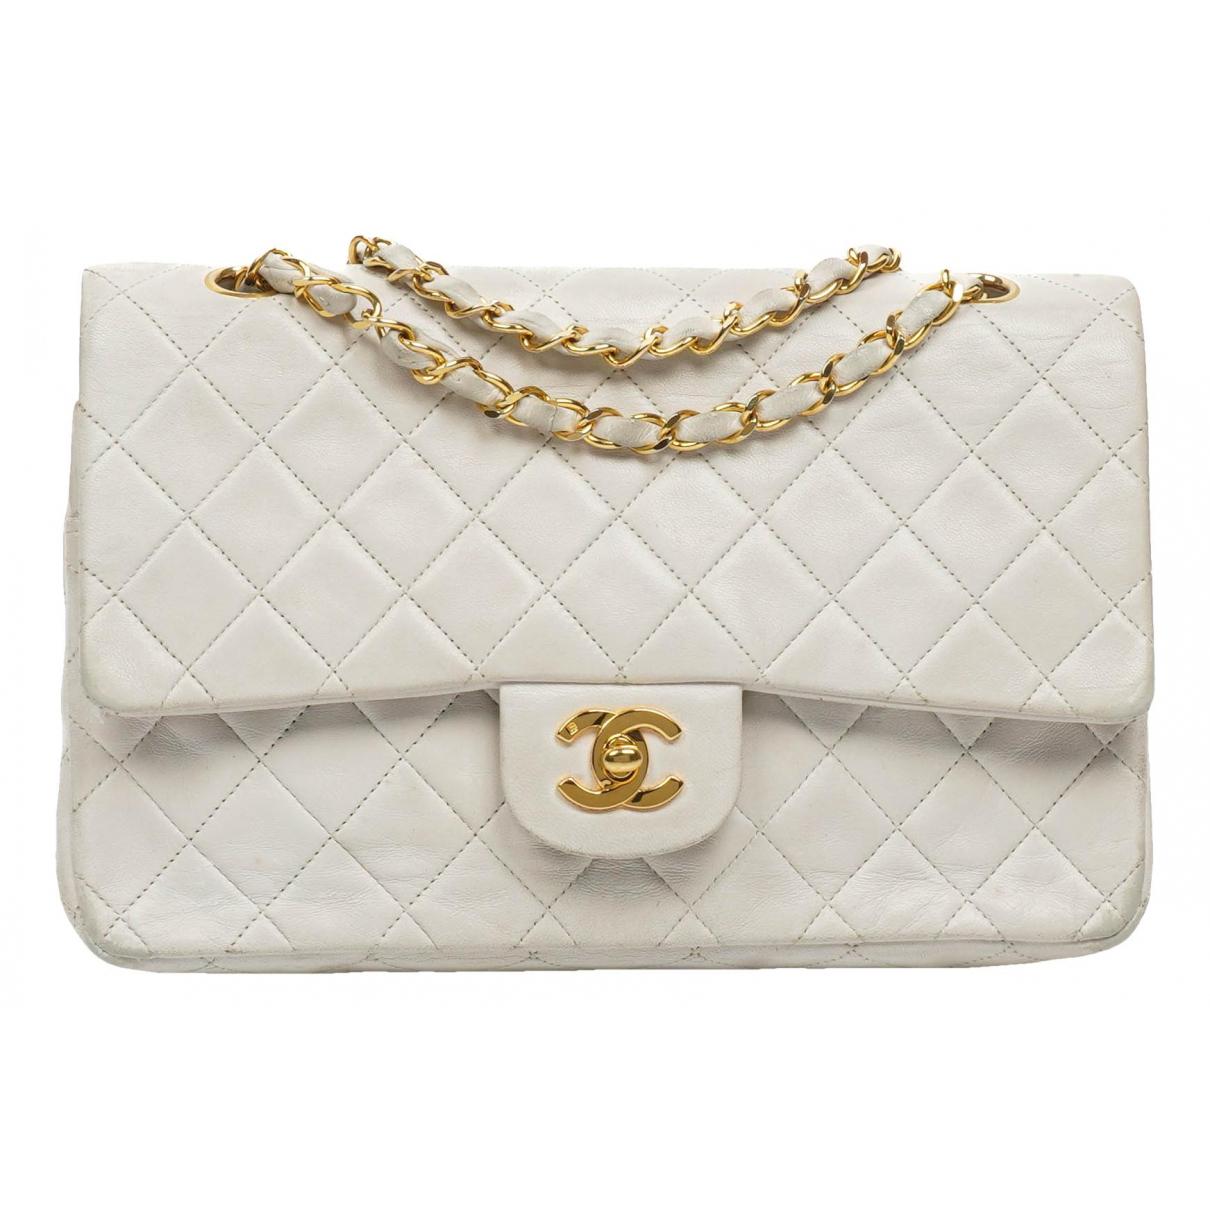 Timeless/classique leather handbag Chanel White in Leather - 35129992